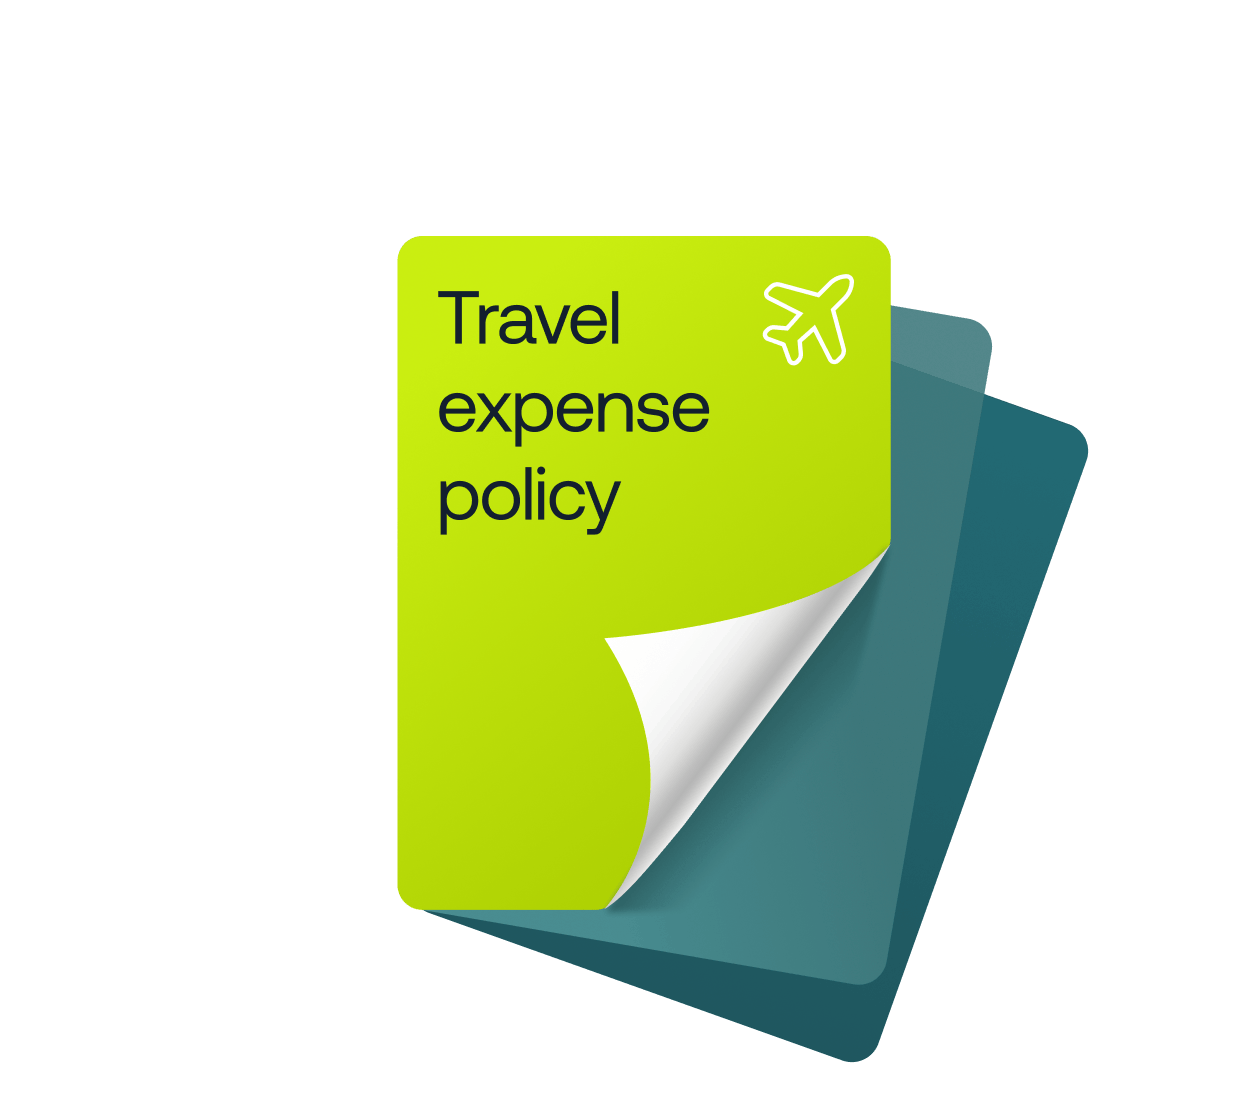 Travel expense policy